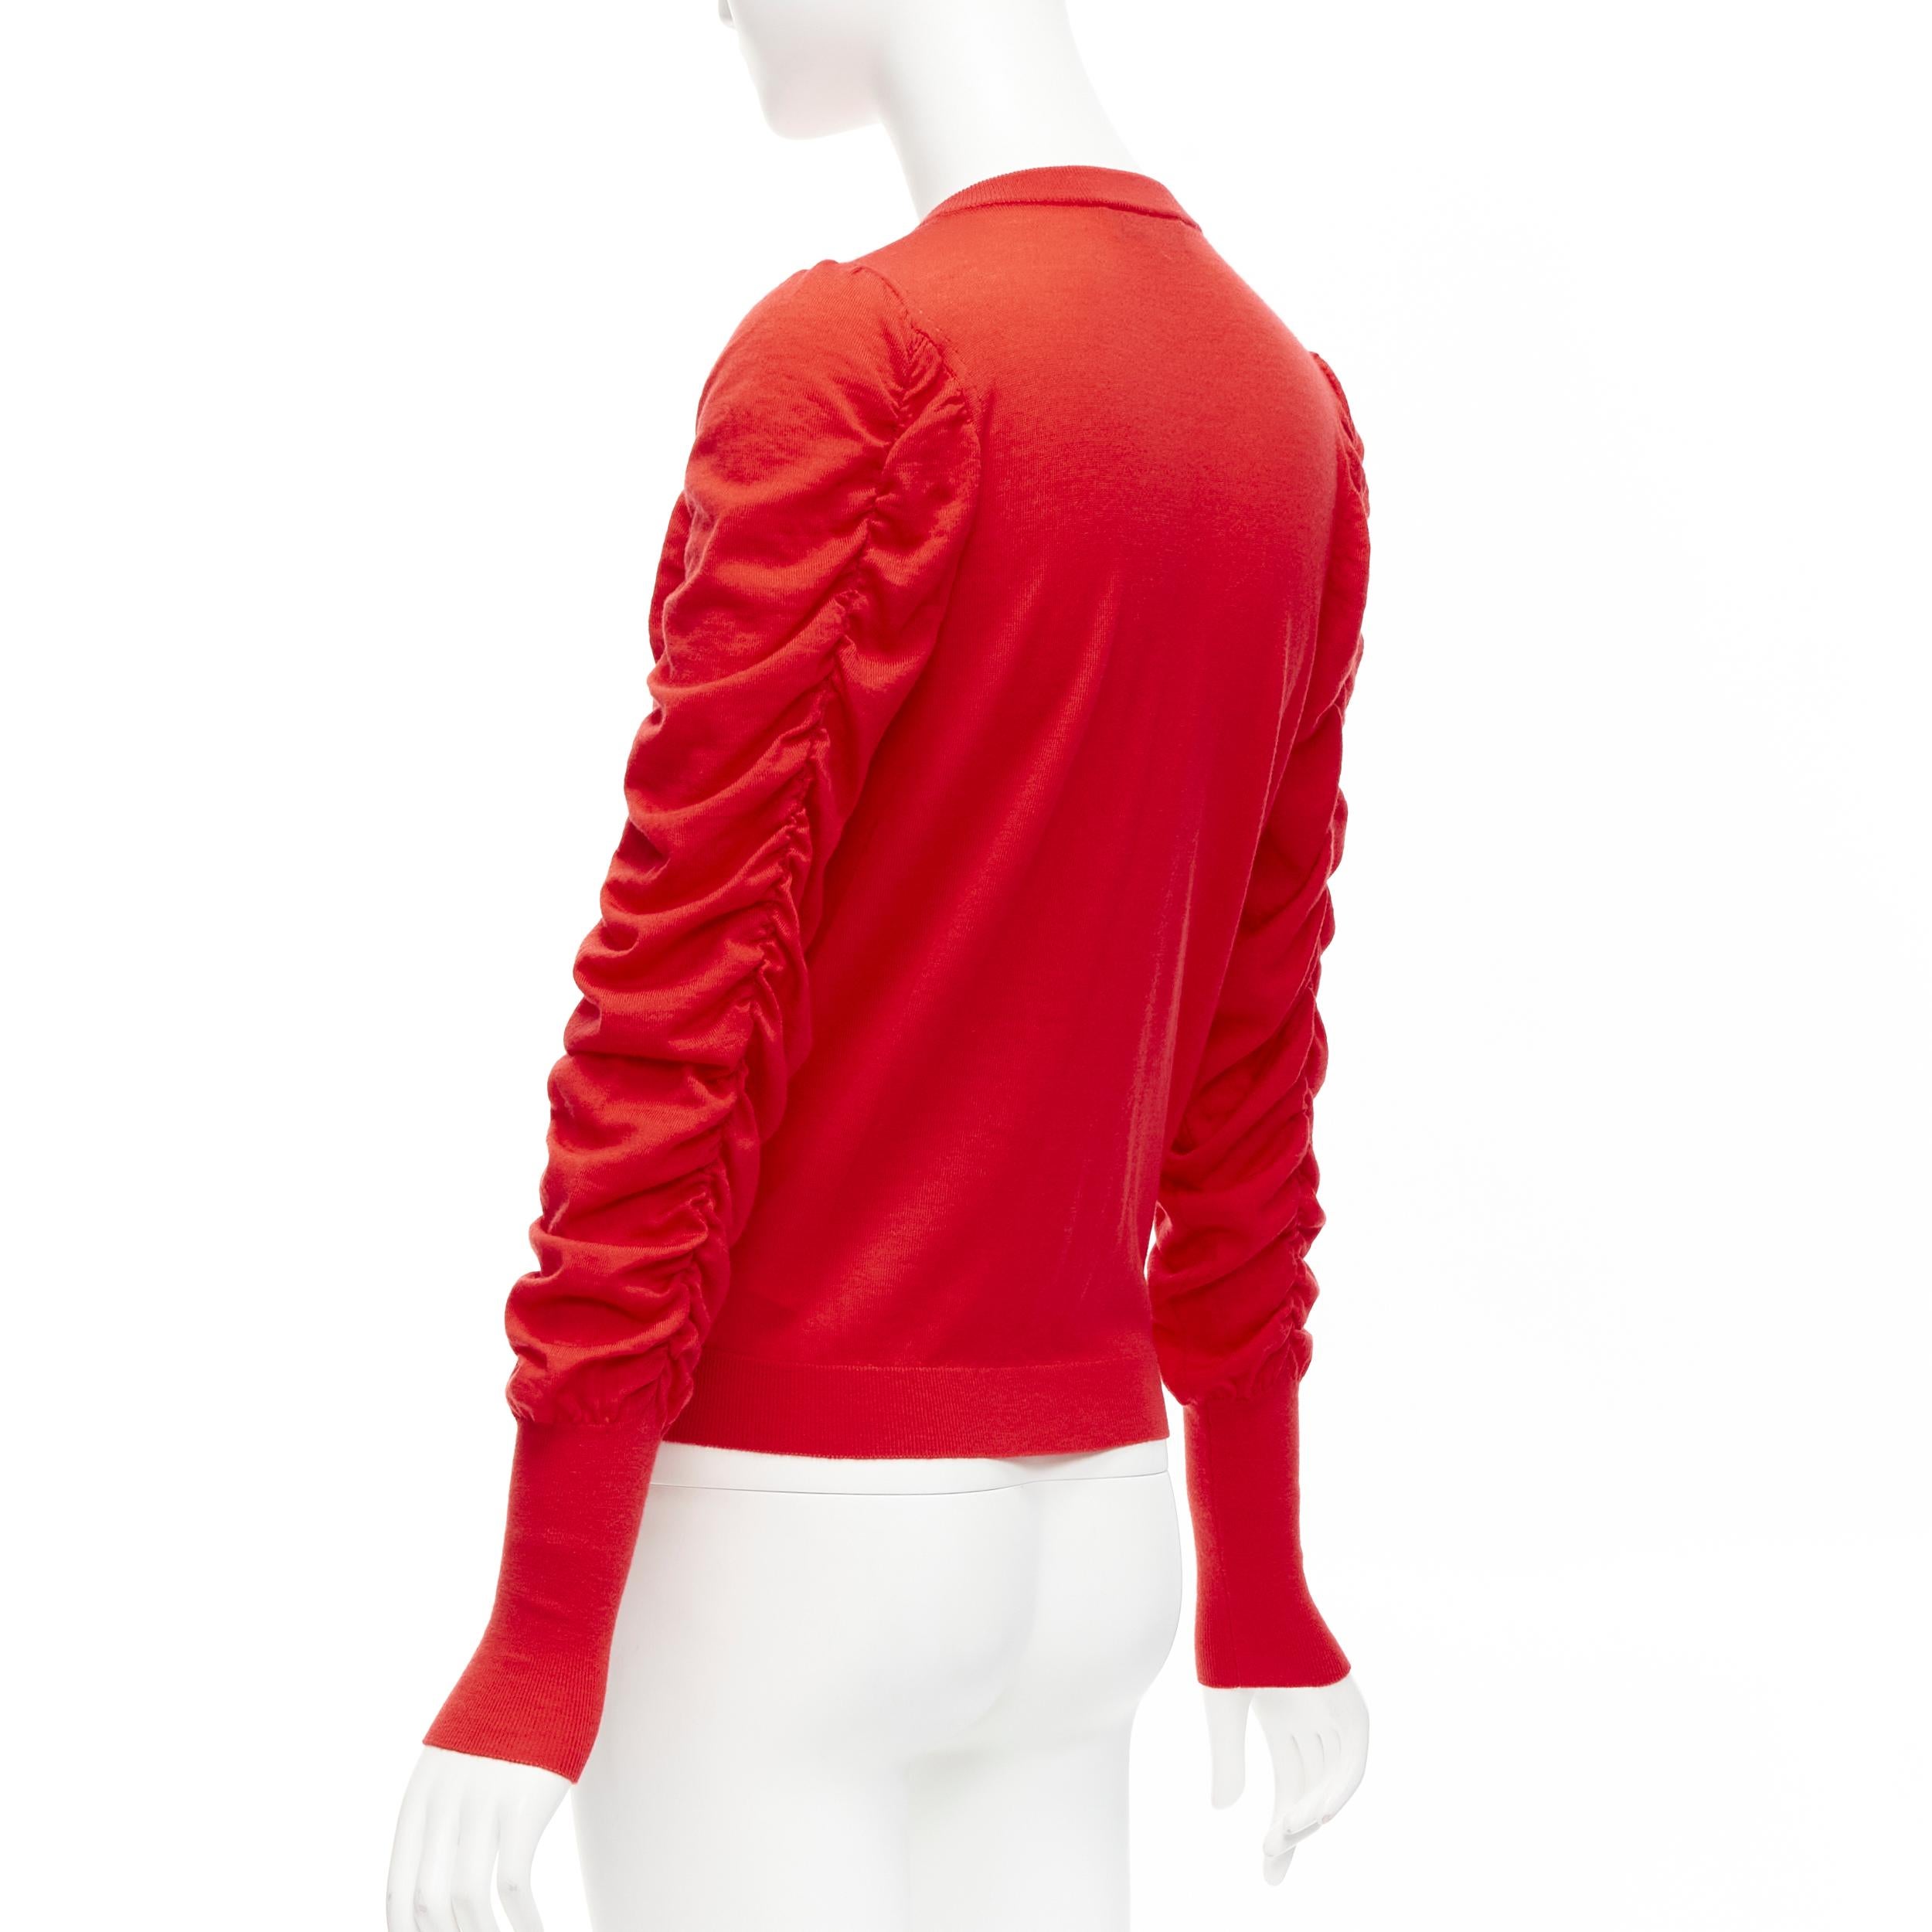 DICE KAYEK red 100% wool ruched sleeves crew neck cardigan sweater FR36 S For Sale 2